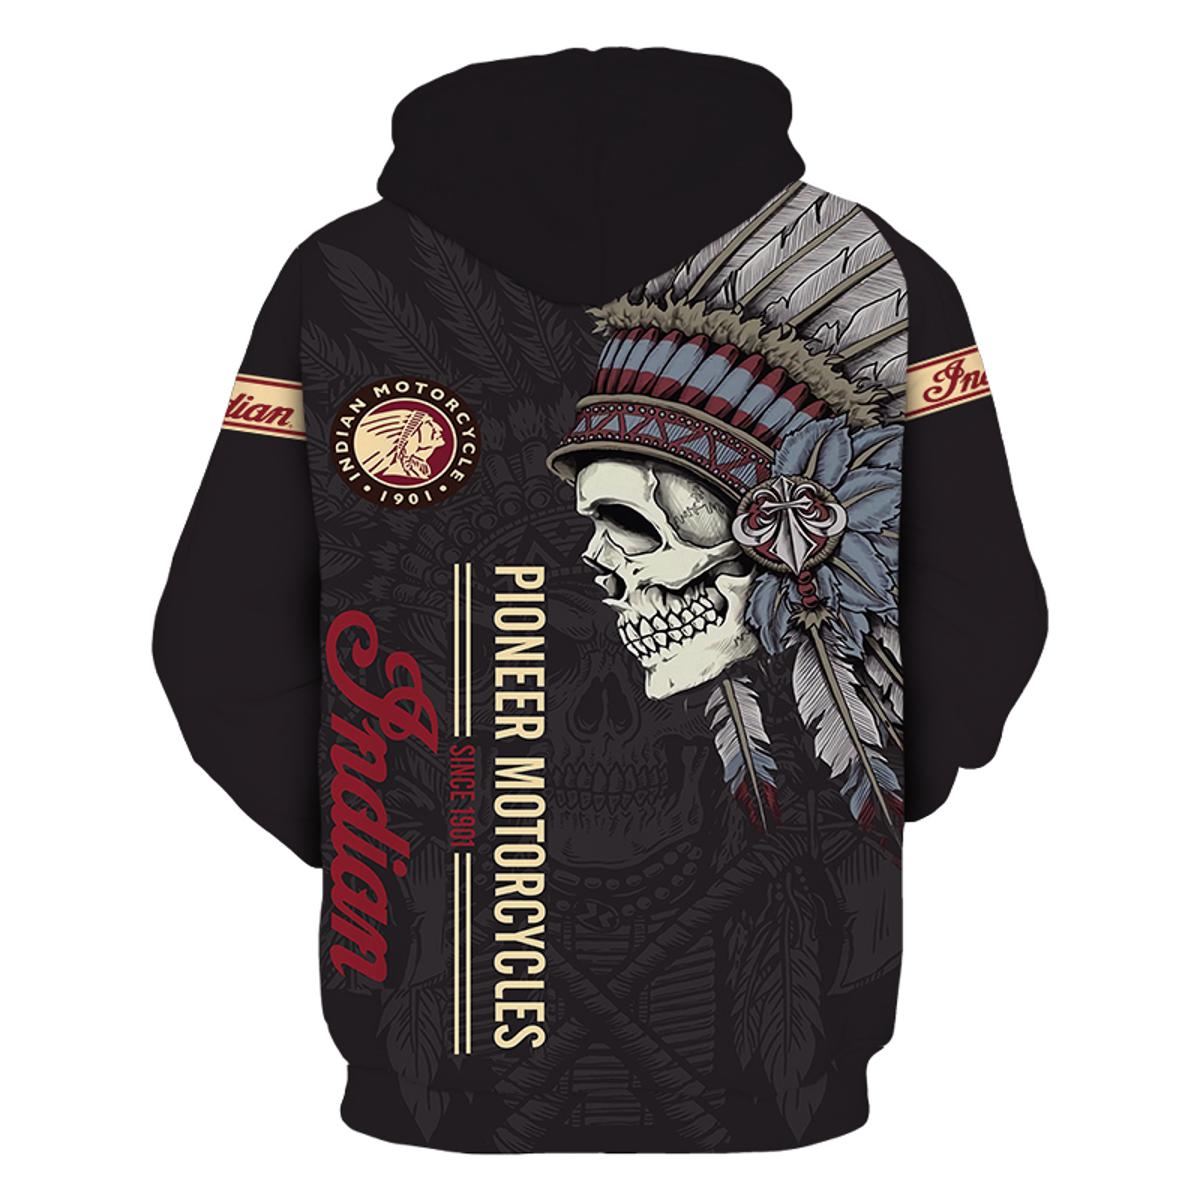 Indian Motorcycles Since 1901 Zip Hoodie For Fans